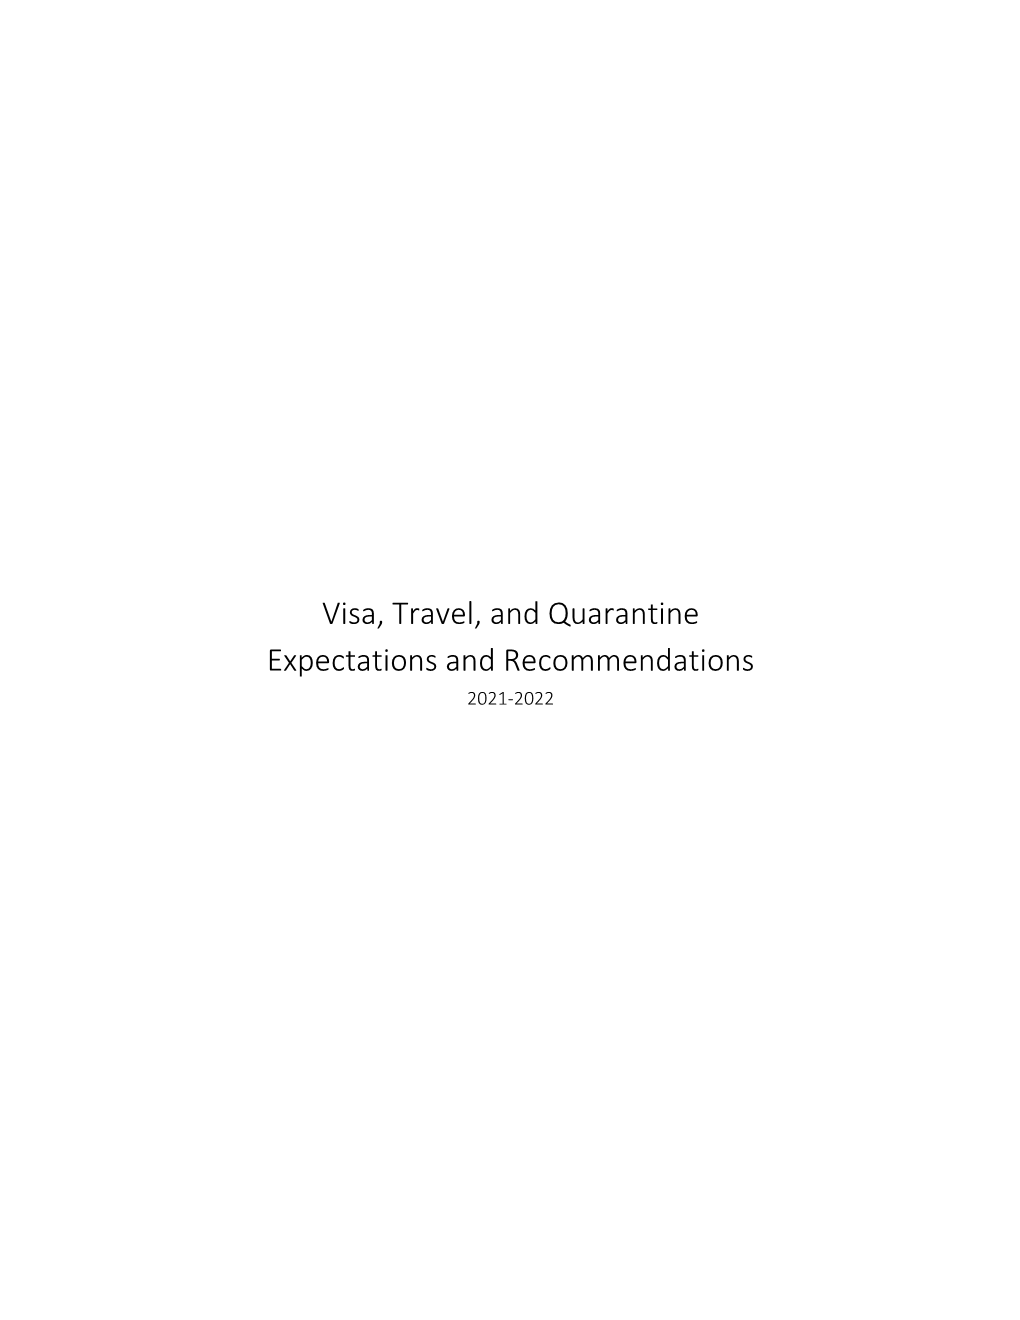 Visa, Travel, and Quarantine Expectations and Recommendations 2021-2022